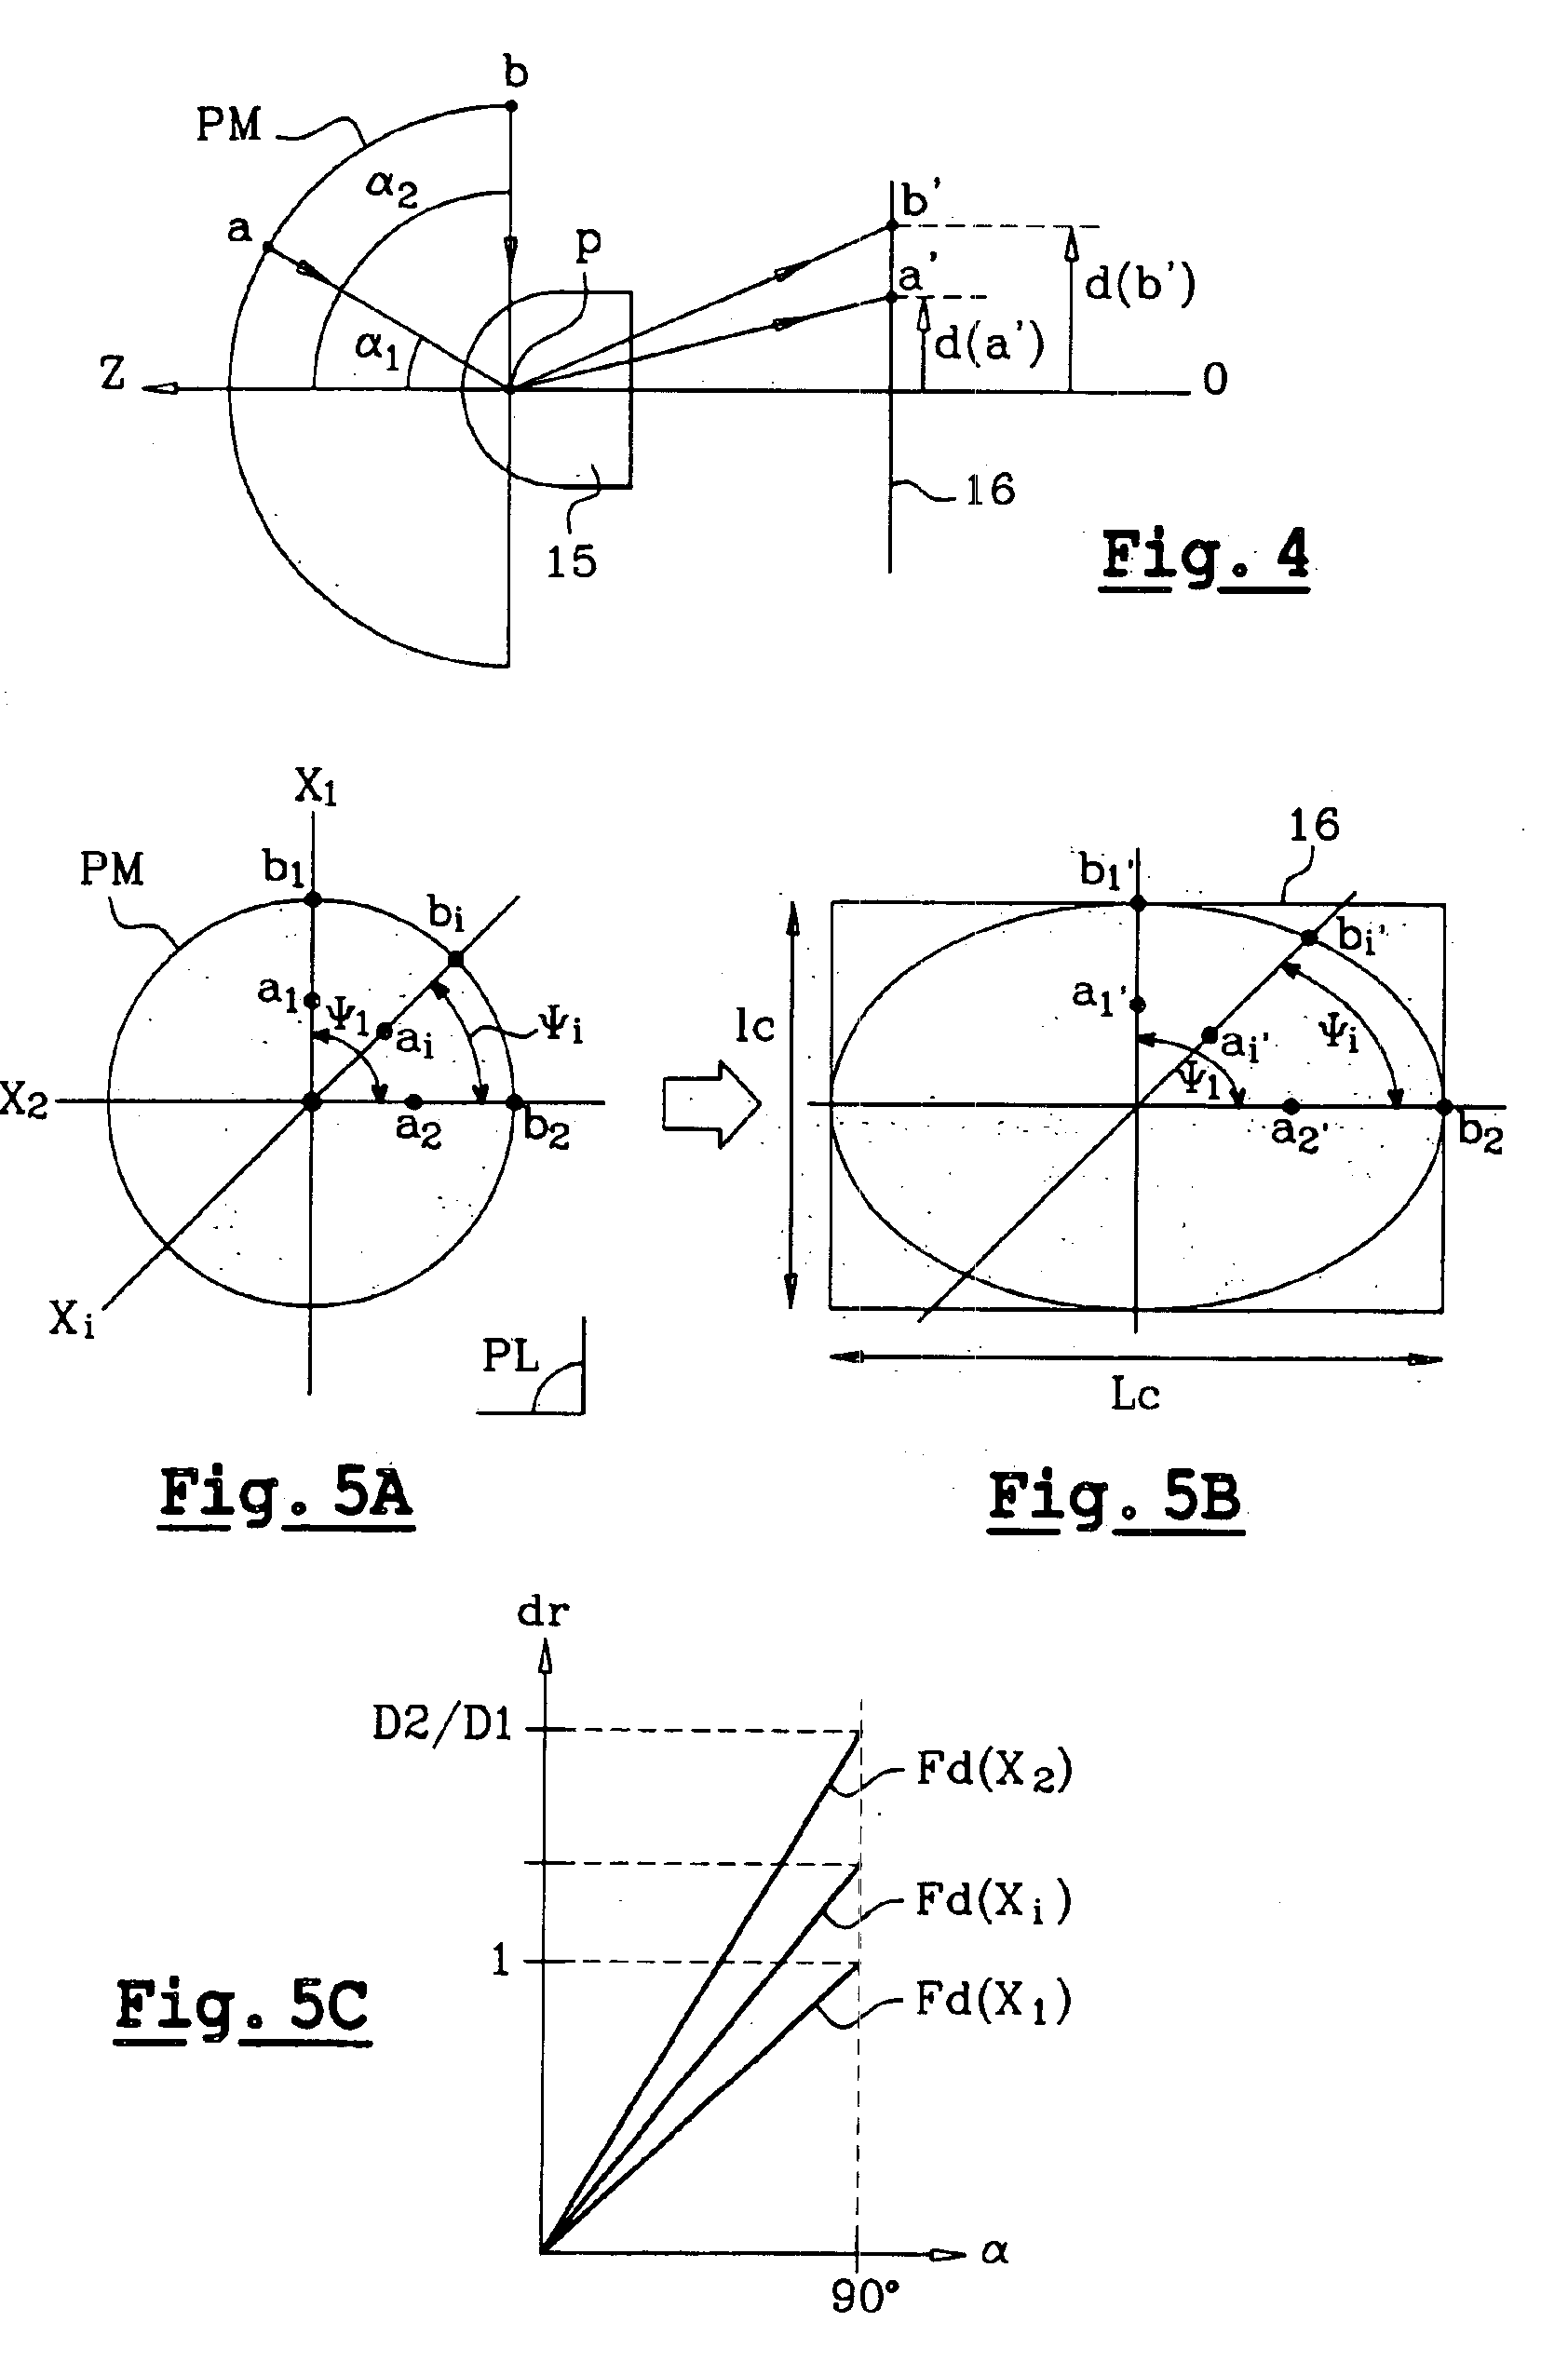 Method for capturing a panoramic image by means of an image sensor rectangular in shape